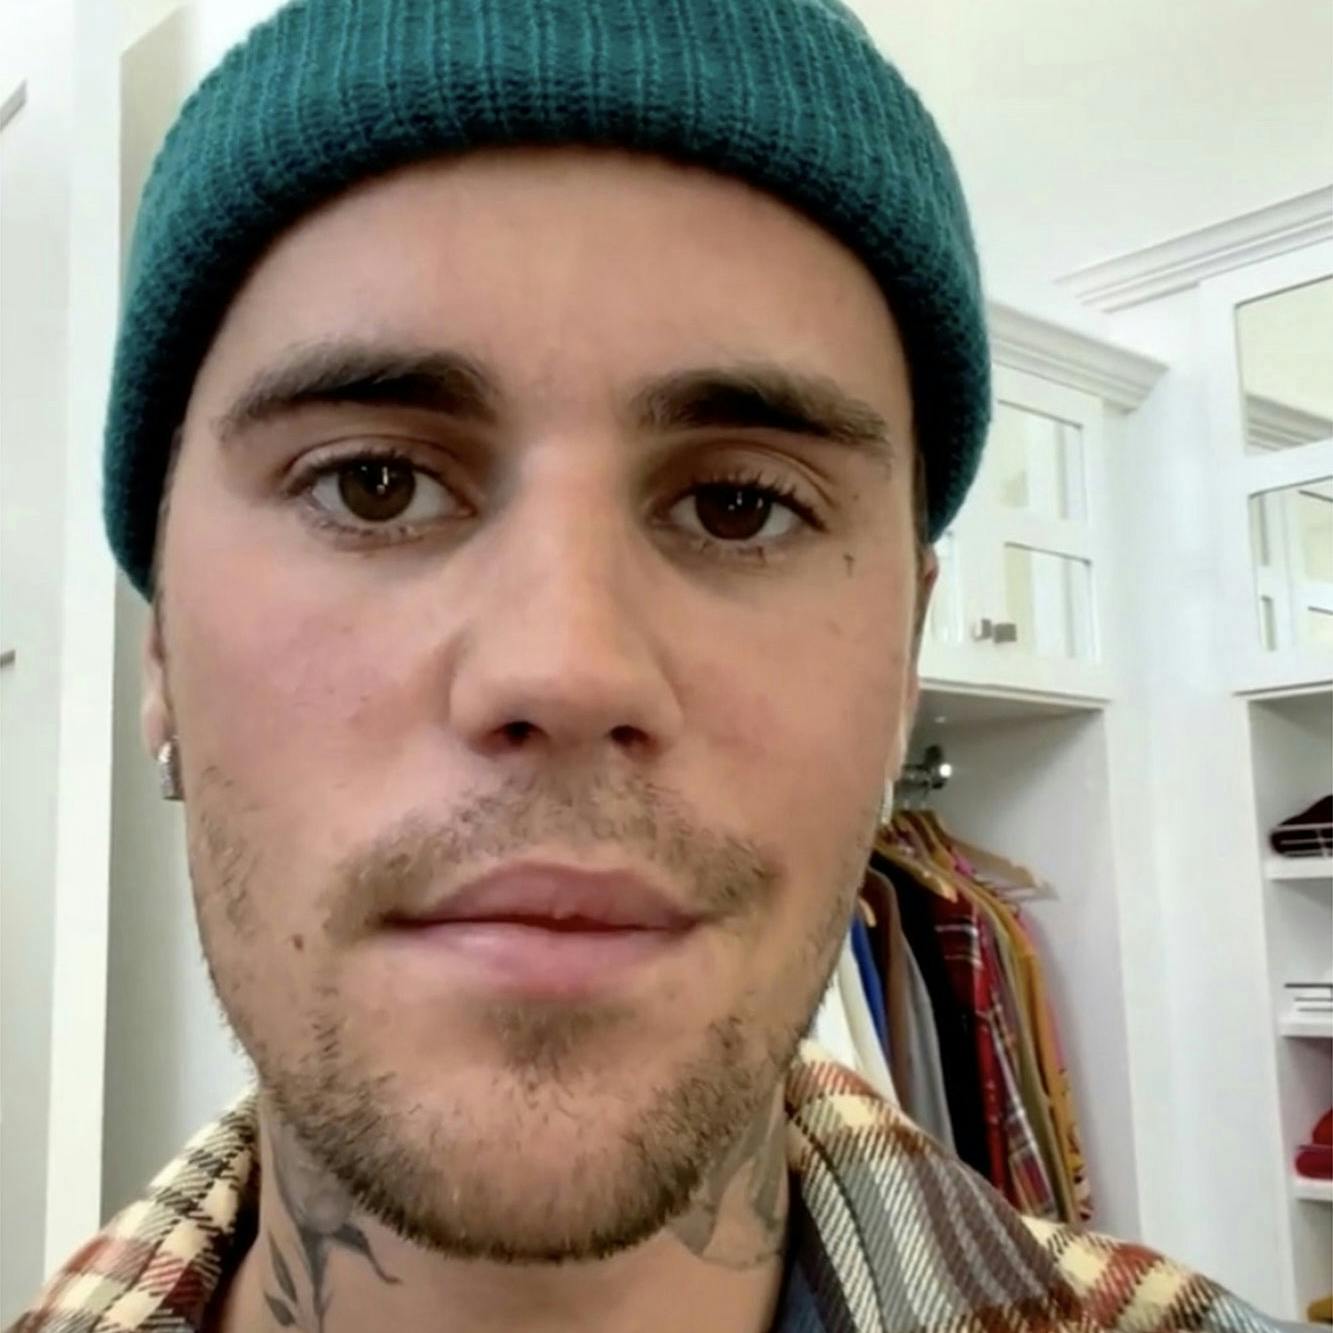 Justin Bieber shares update after revealing his face is partially paralyzed Image